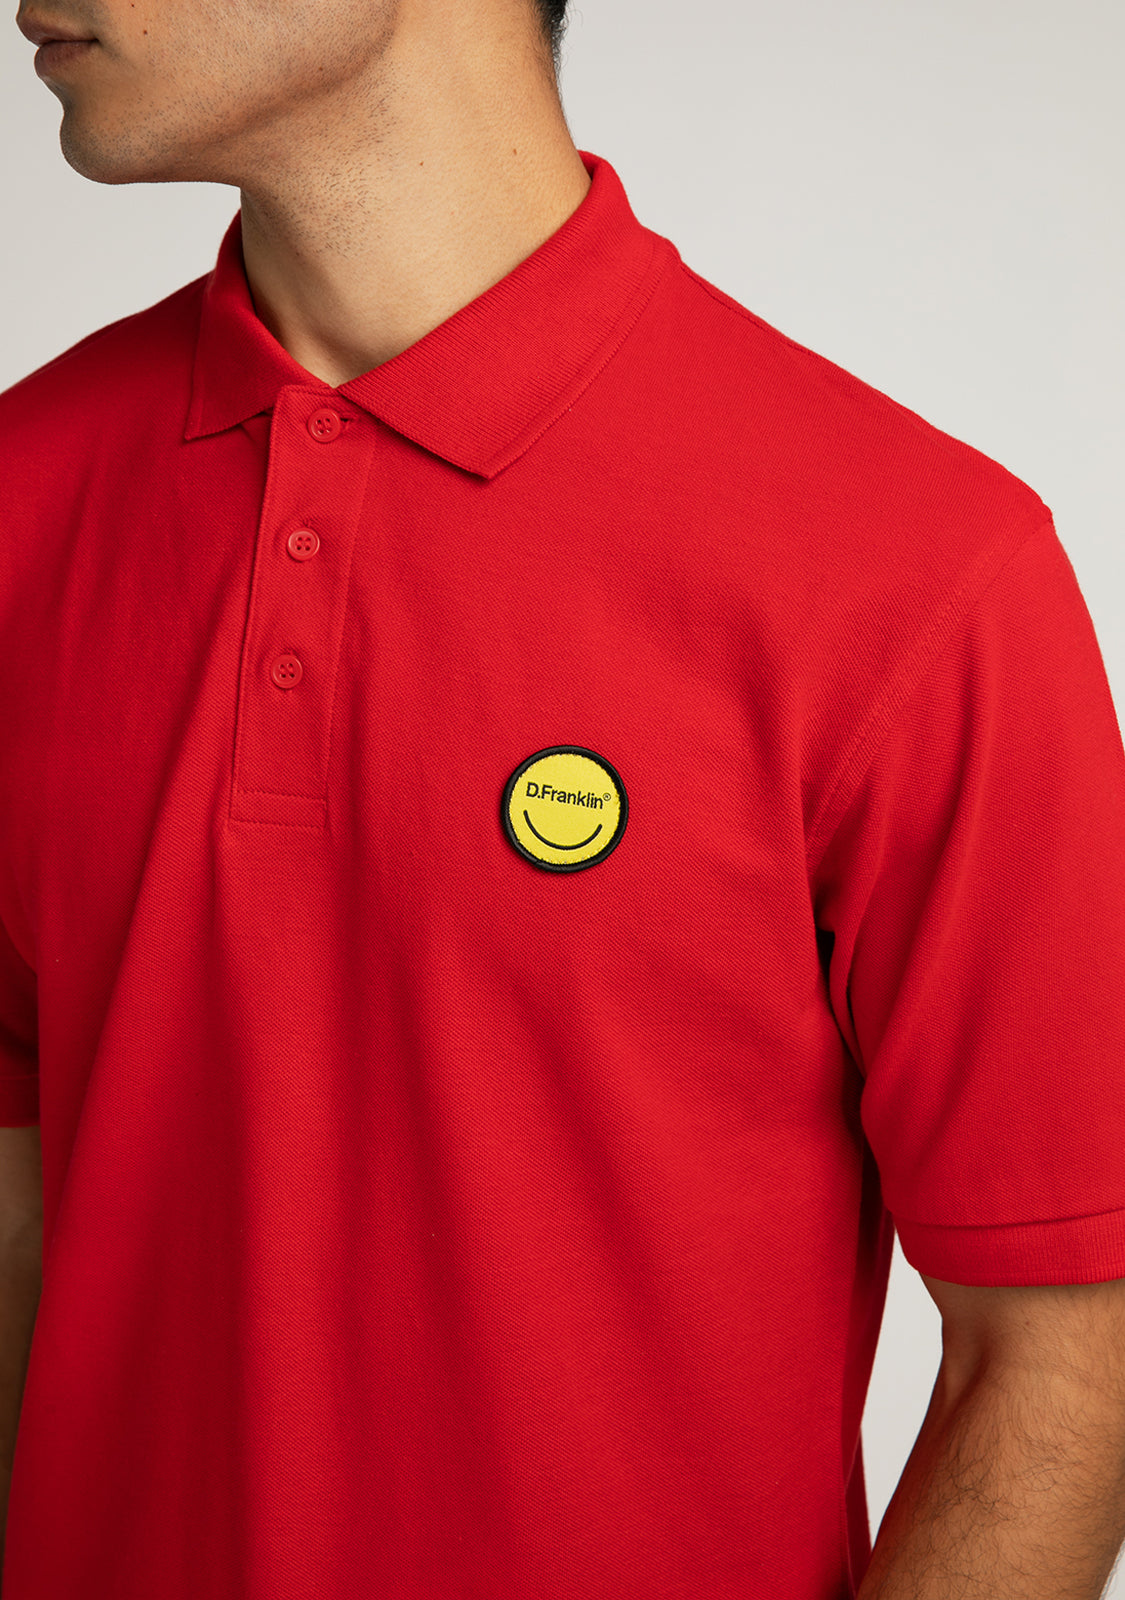 Polo Smiley Red